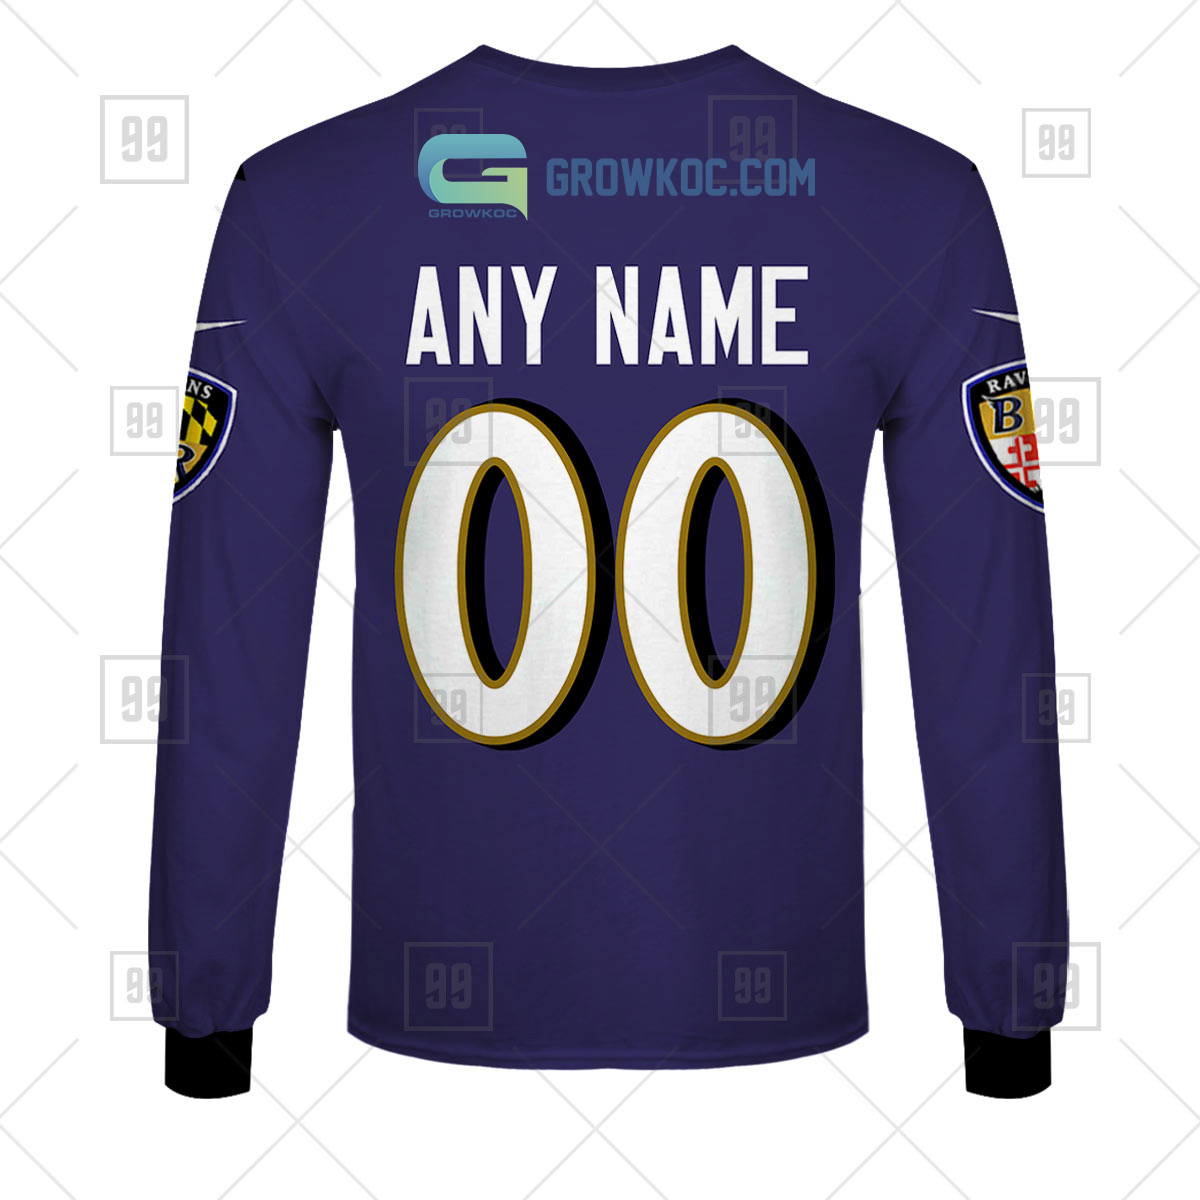 baltimore nfl jersey on